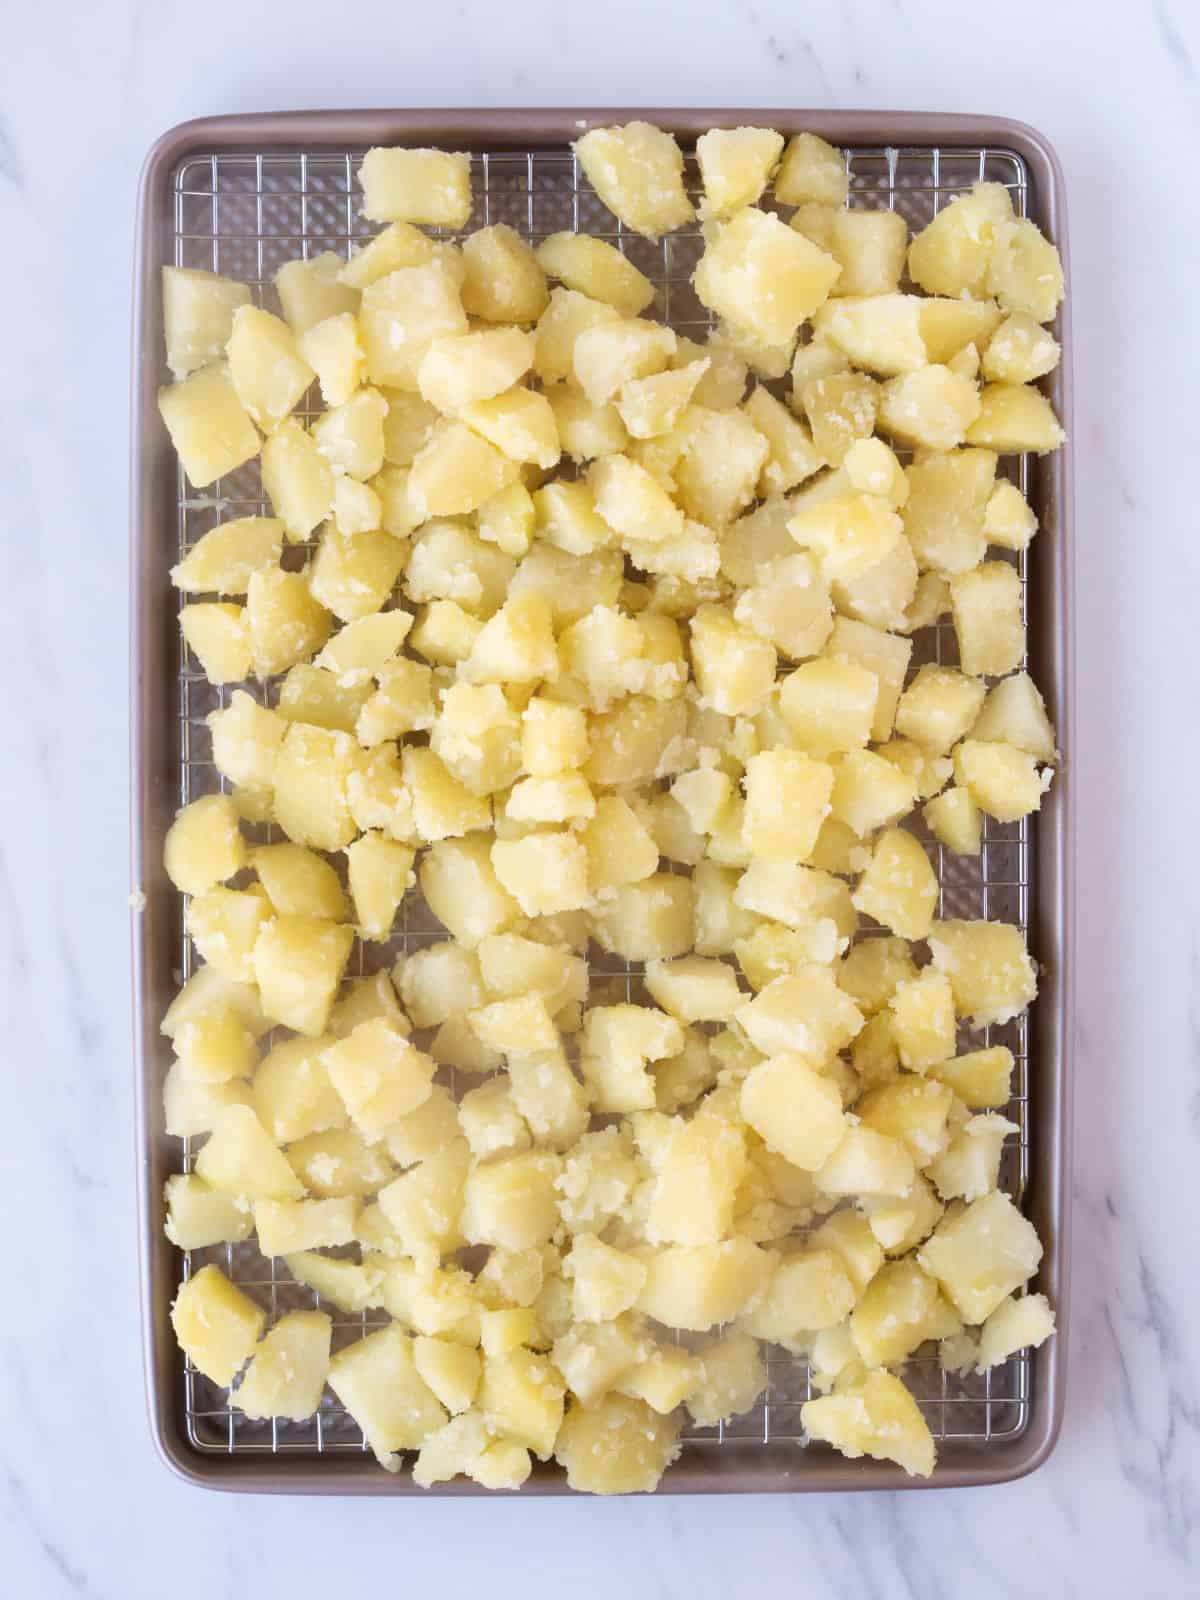 A wire rack placed on a baking sheet with cubed boiled potatoes.